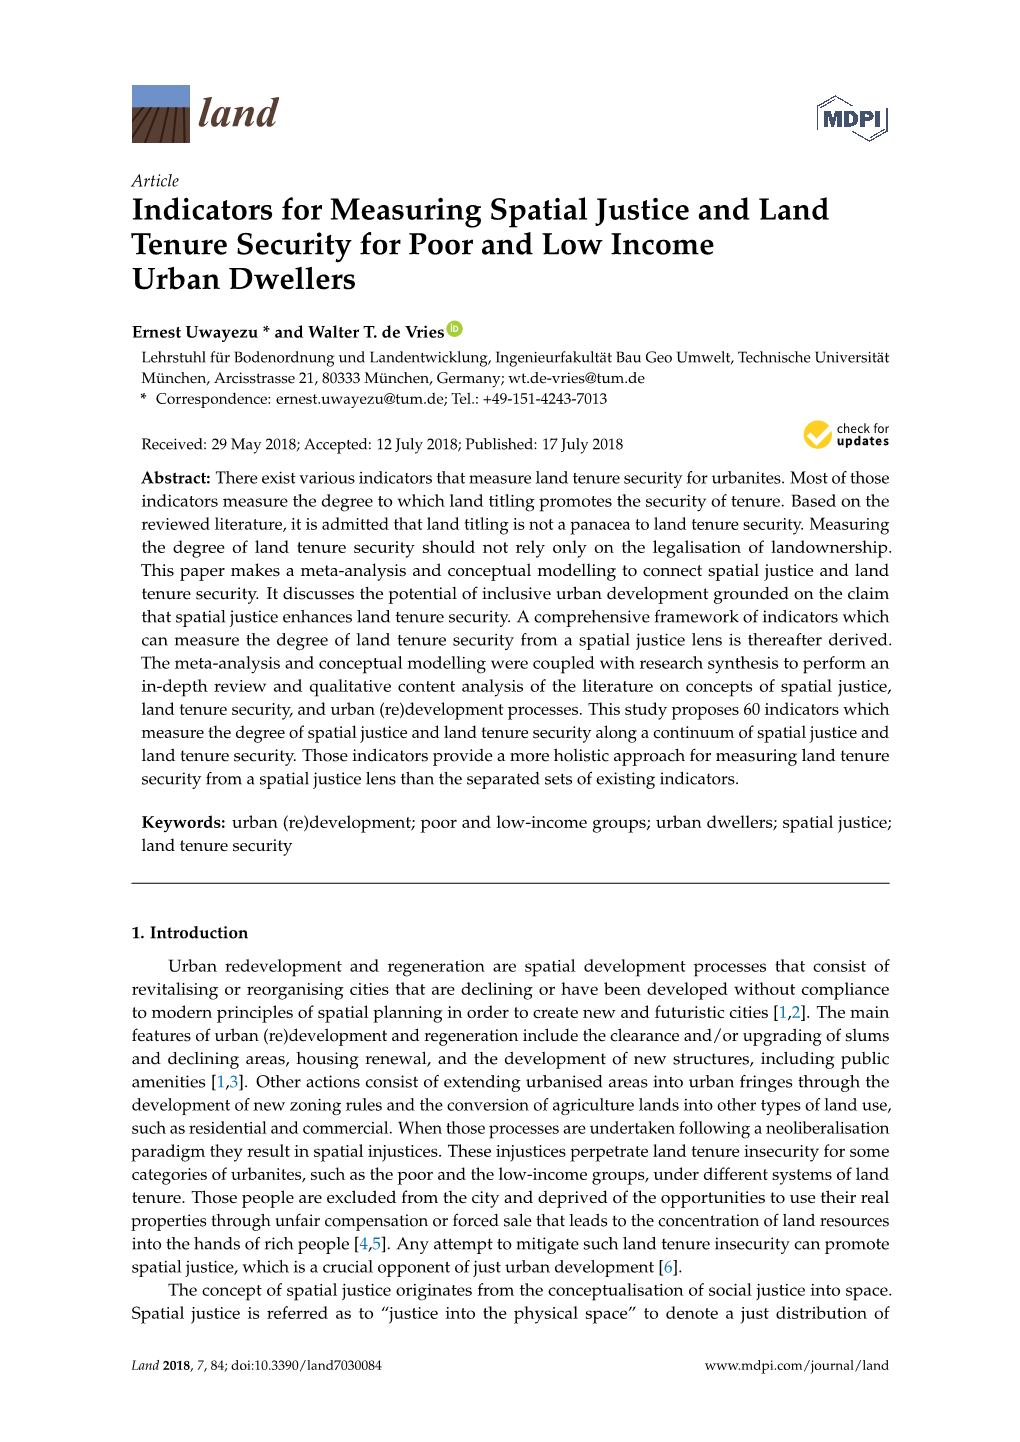 Indicators for Measuring Spatial Justice and Land Tenure Security for Poor and Low Income Urban Dwellers